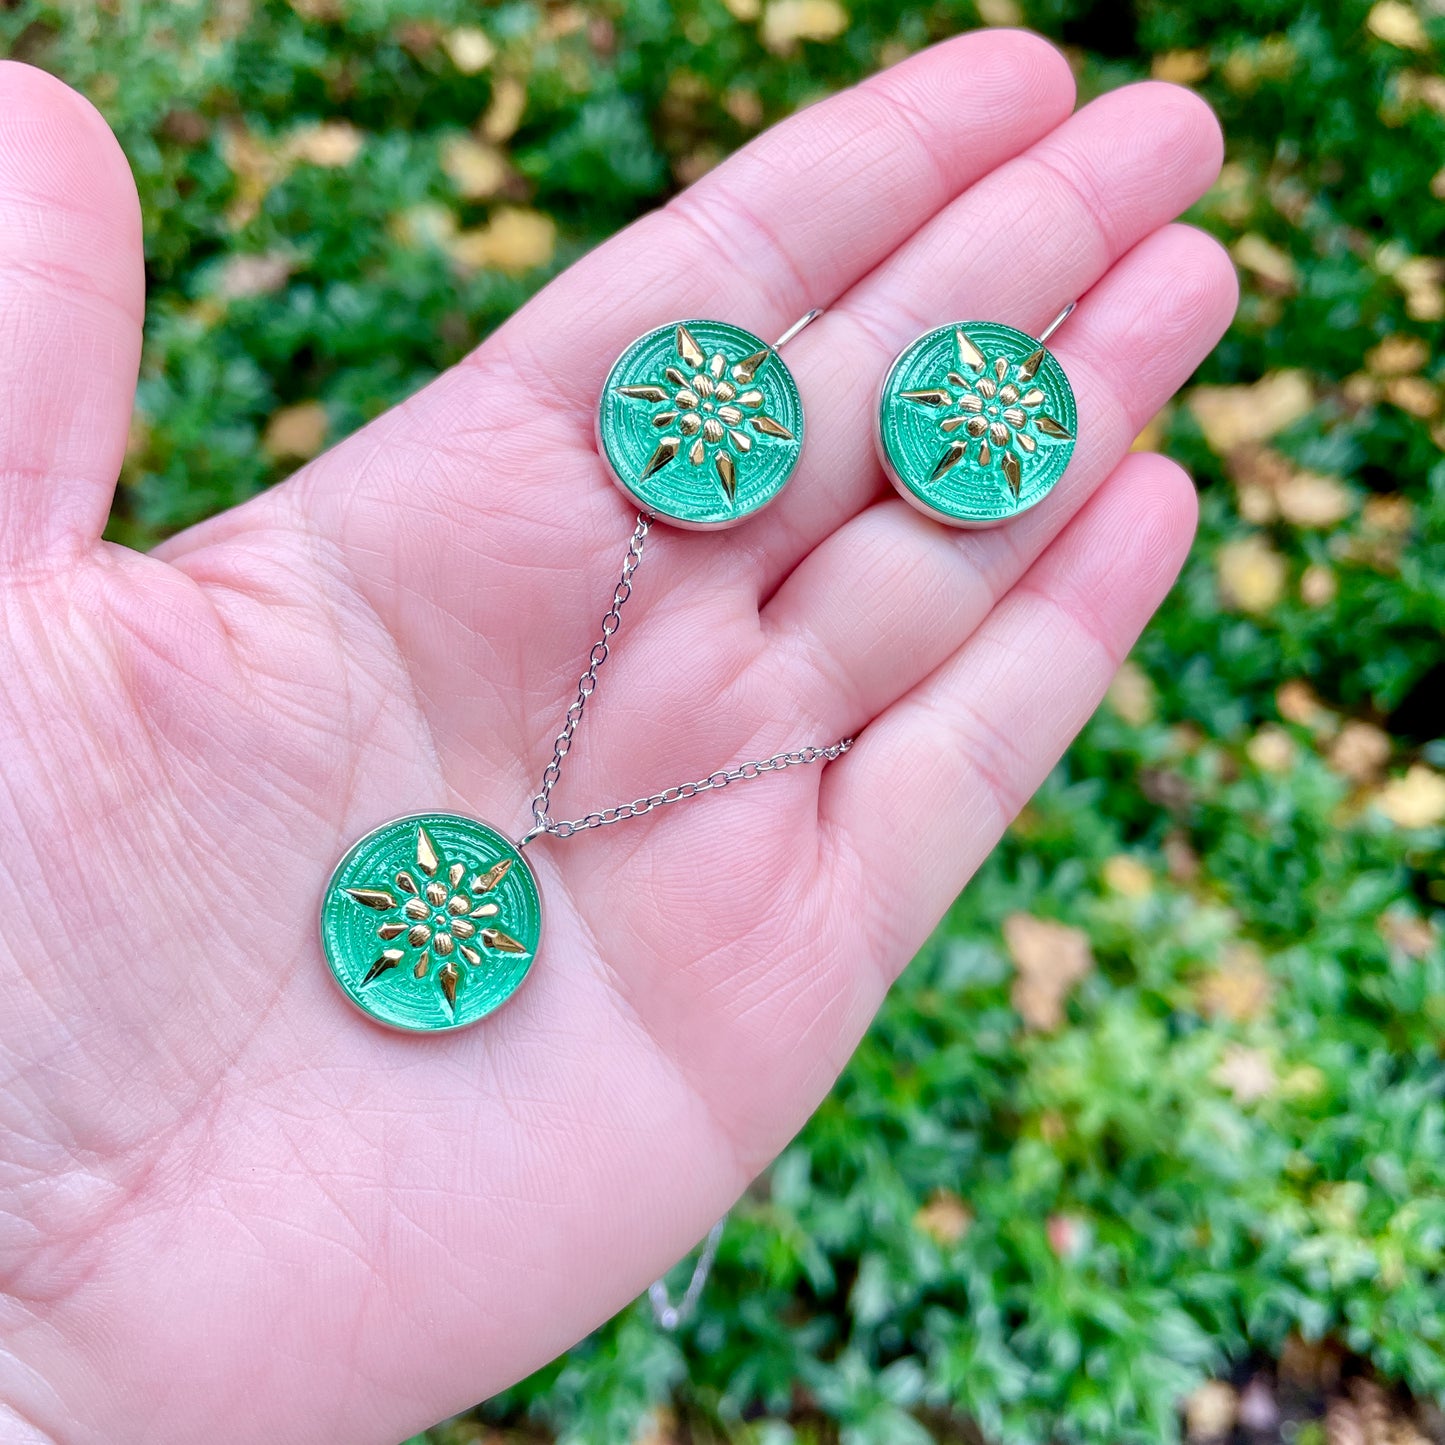 Green and Gold Star Flower Uranium Glass Button Necklace and Earrings Gift Set